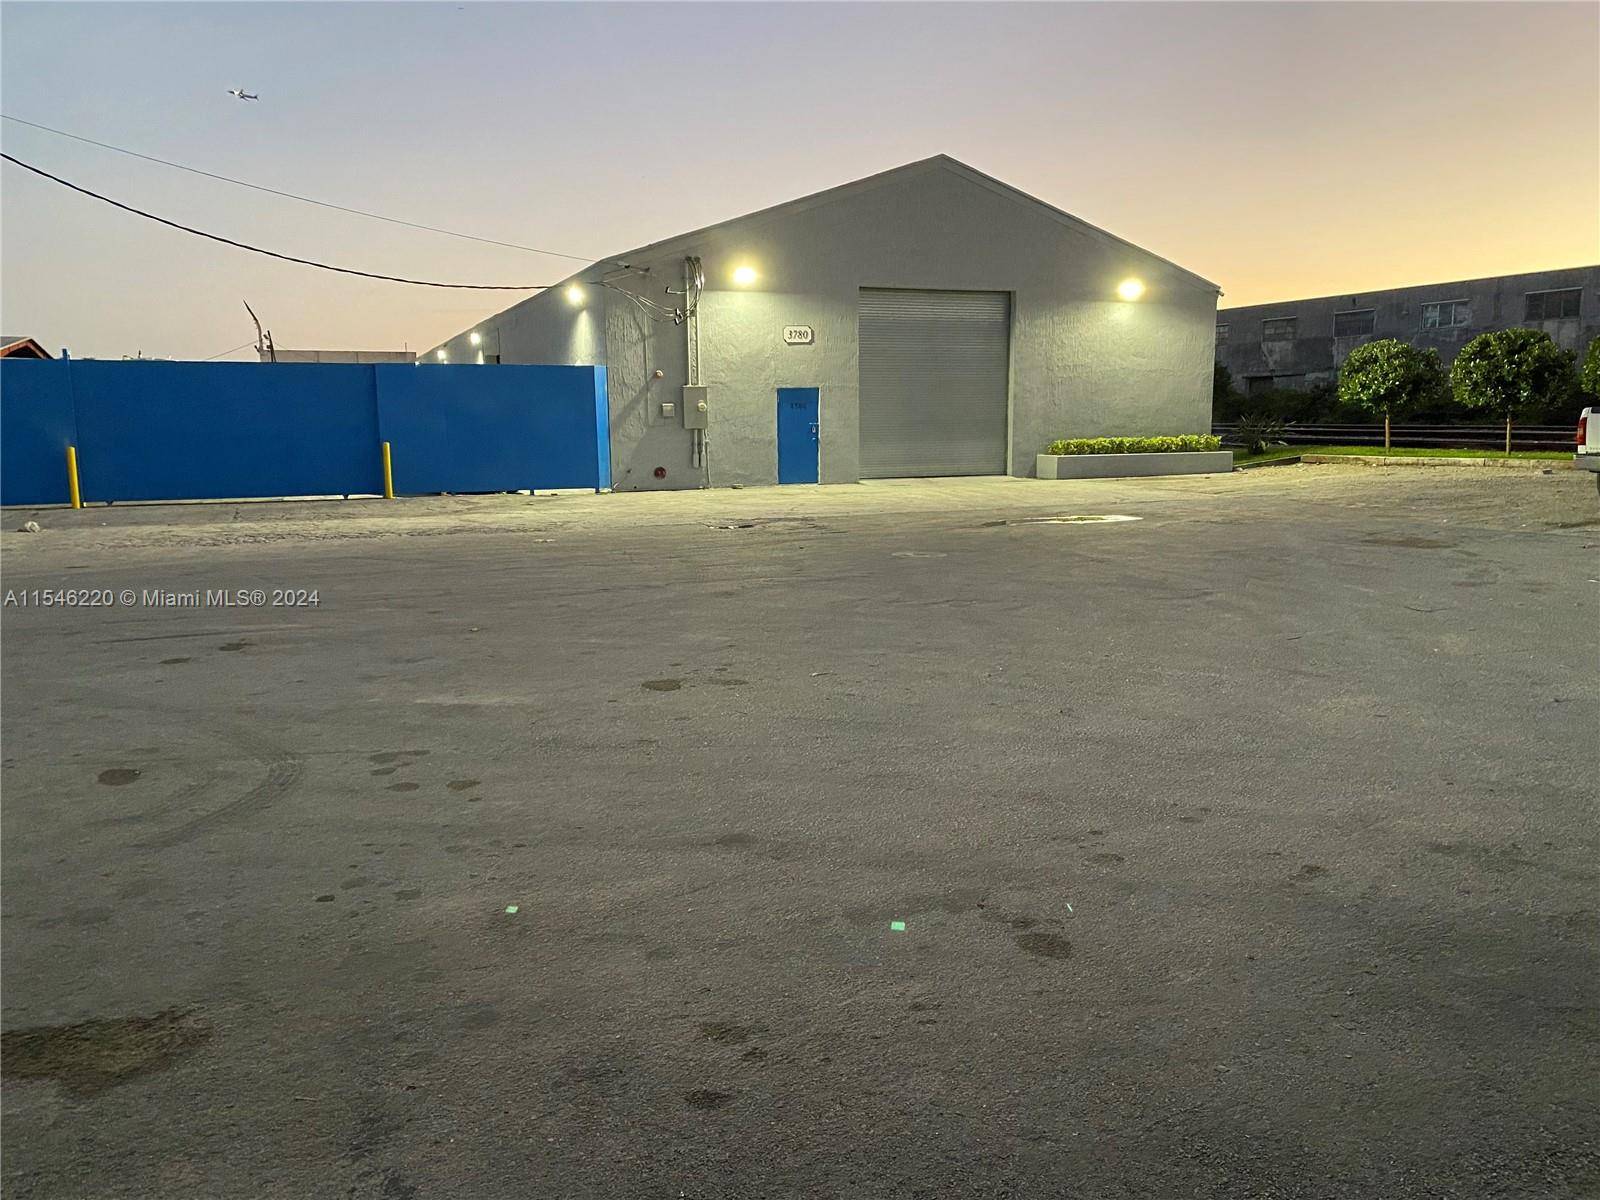 EXCELLENT OPPORTUNITY TO PURCHASE A HUGE WAREHOUSE 25, 333 SQFT, PLENTY OF PARKING A VAILABLE.